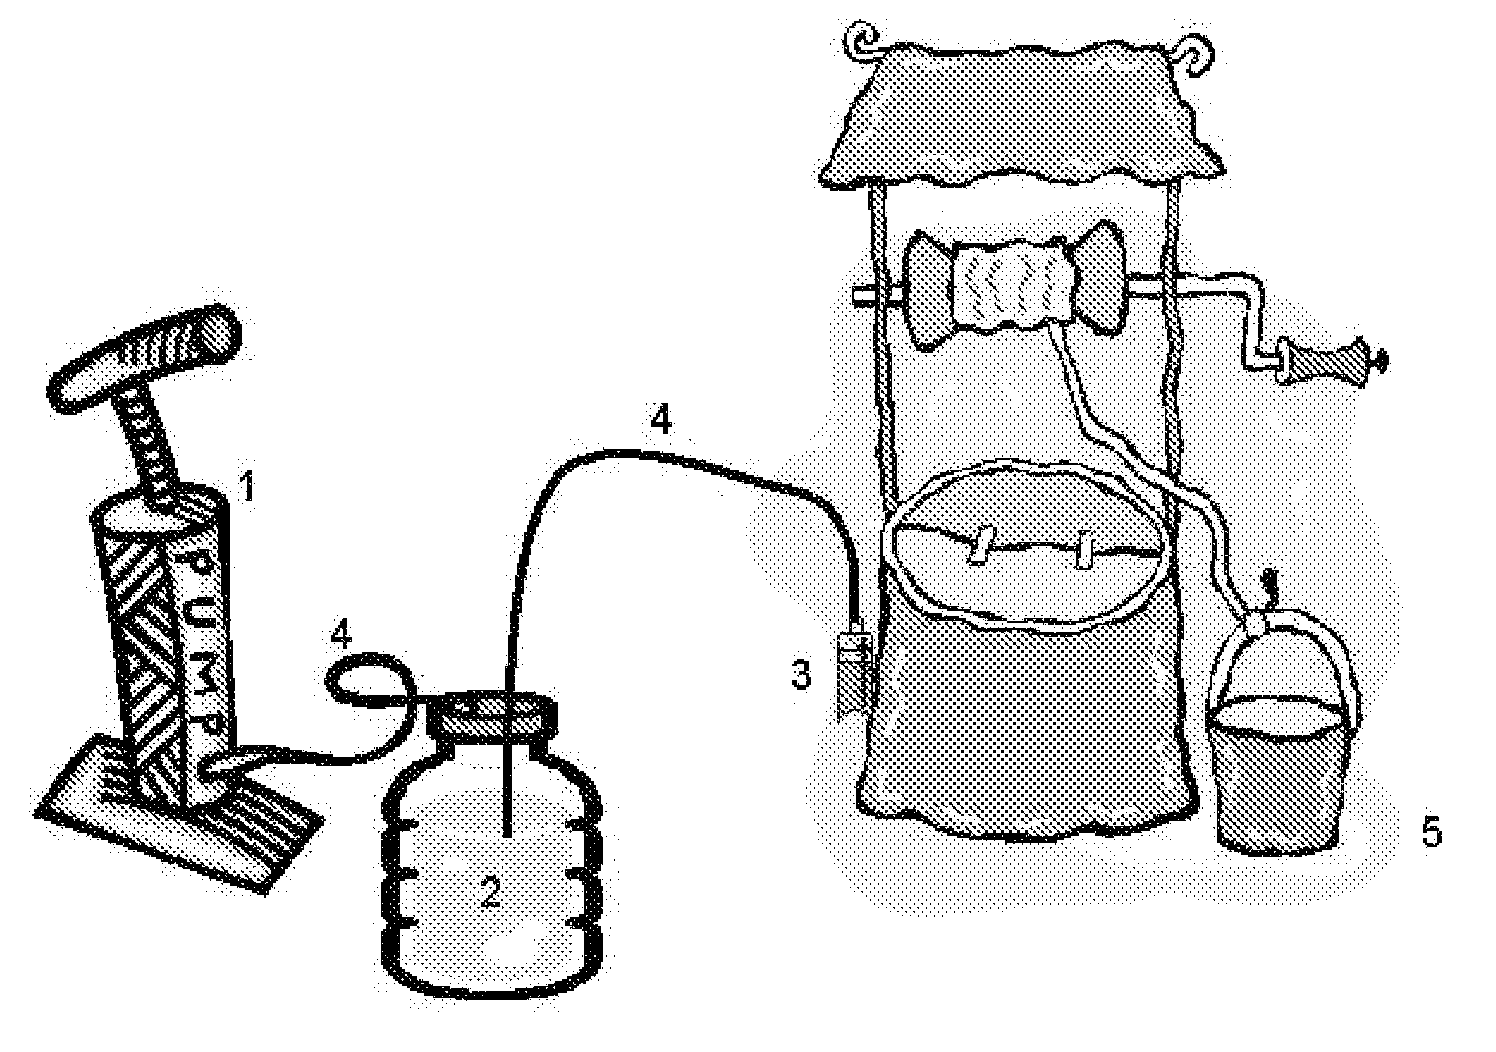 System for detecting microbial contamination